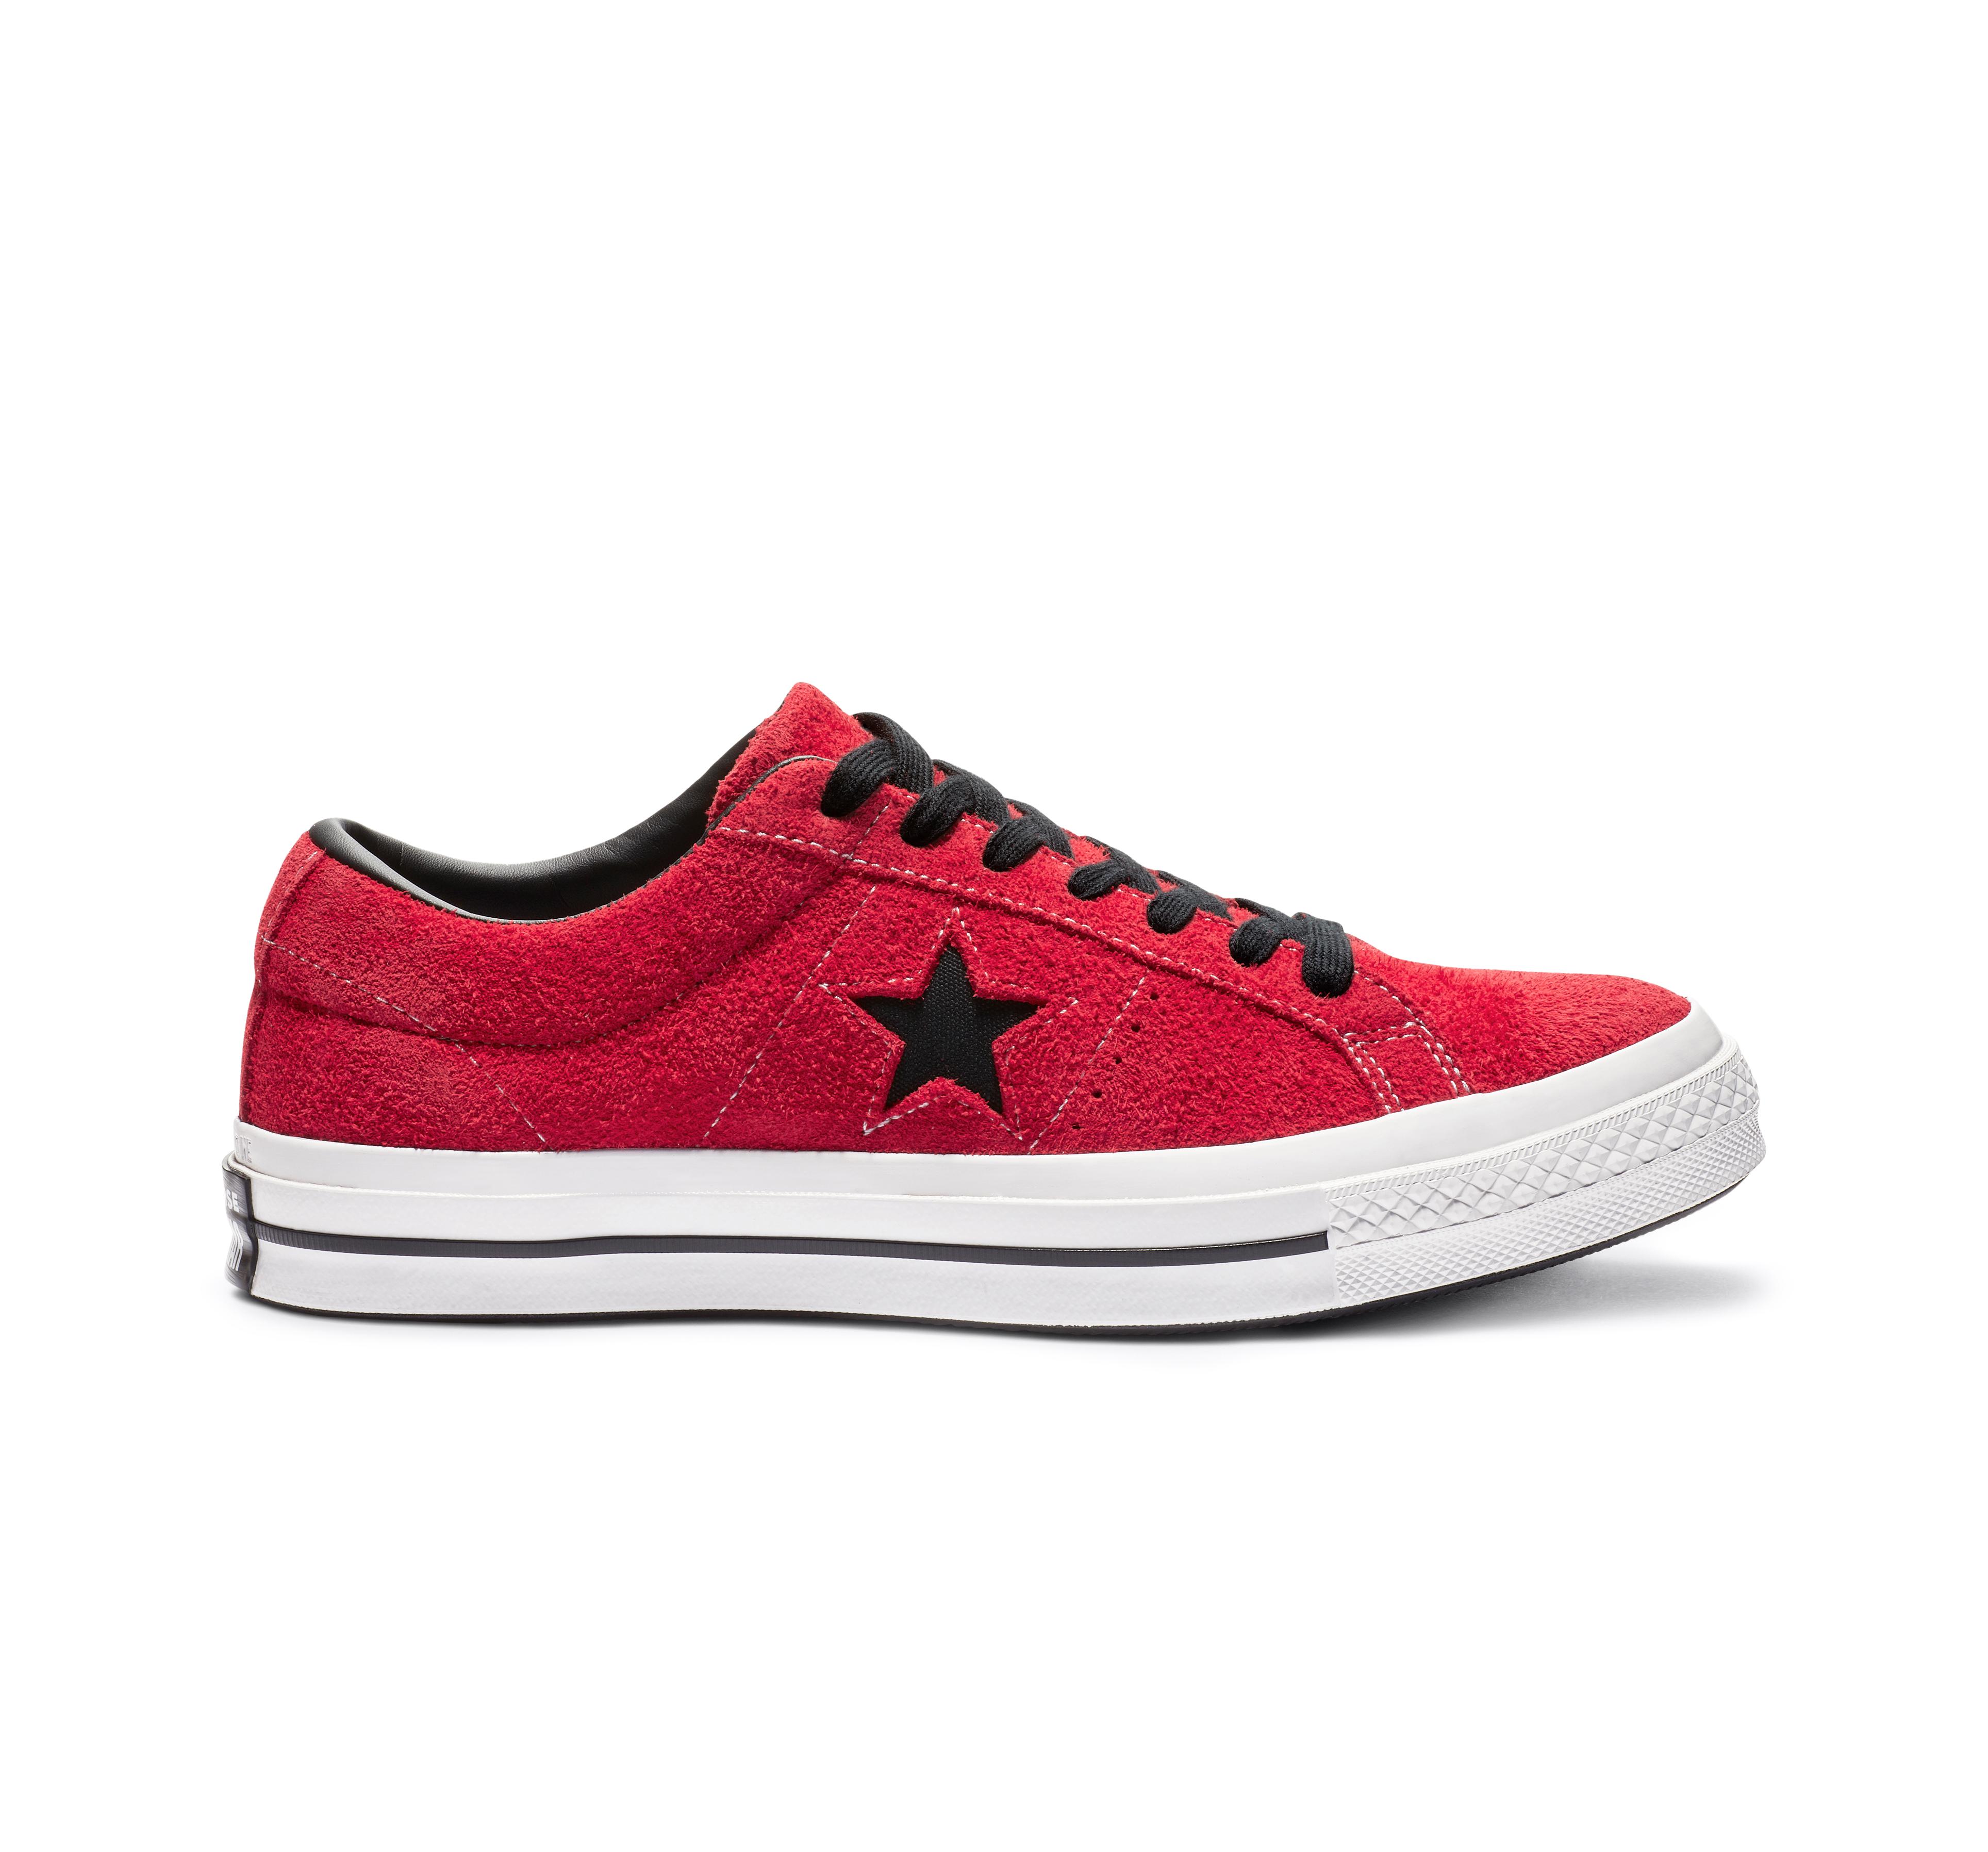 Converse One Star Dark Star Vintage Suede Low Top in Red for Men - Lyst